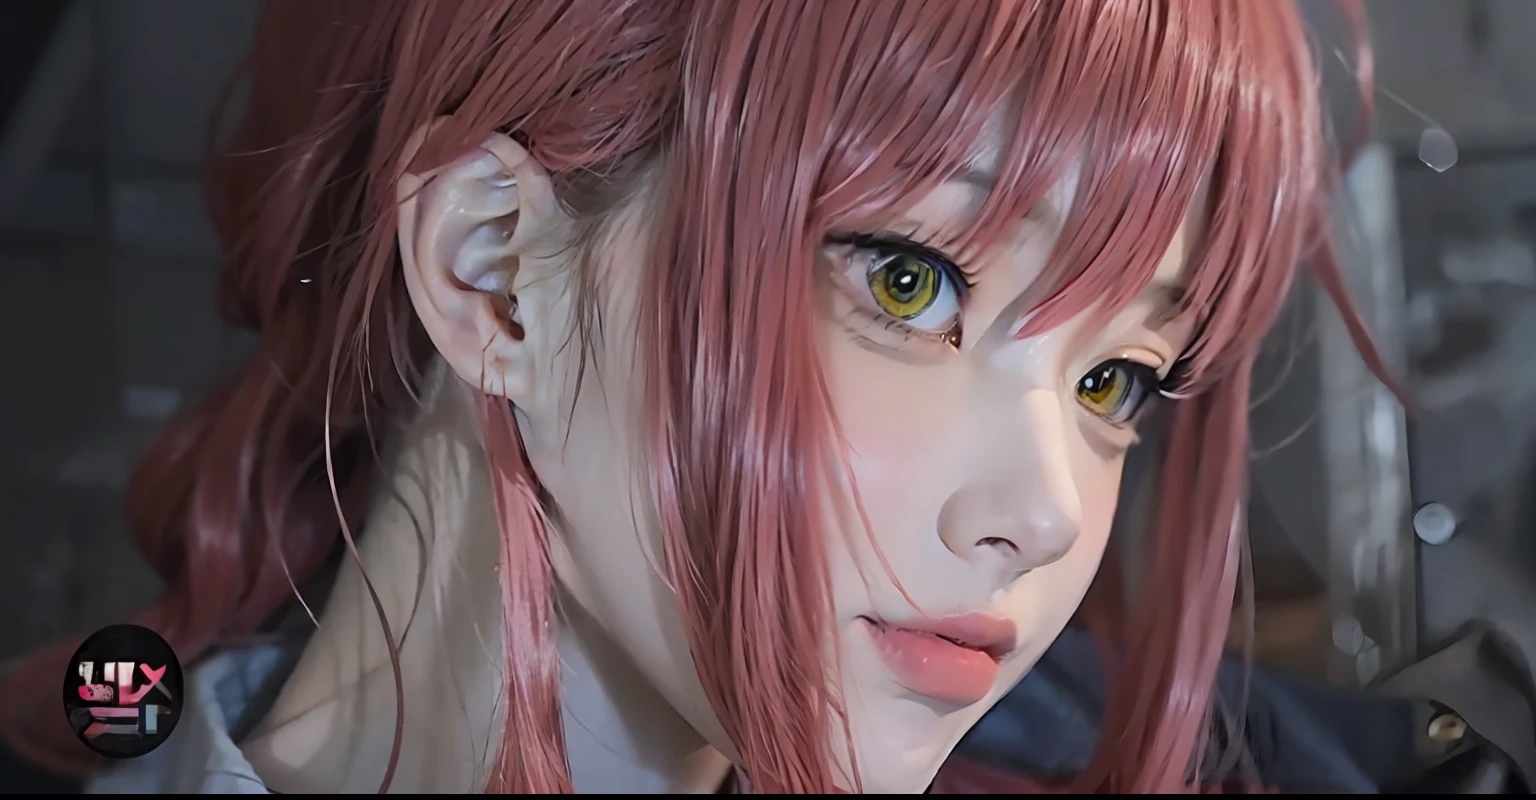 there is a woman with pink hair wearing a tie and a suit, anime girl in real life, a hyperrealistic schoolgirl, Hyper realistic anime, photorealistic anime, a hyperrealistic , realistic young anime girl, realistic cosplay, Anime Realism Style, kawaii realistic portrait, realistic anime, Stunning anime face portrait, realistic anime style at pixiv